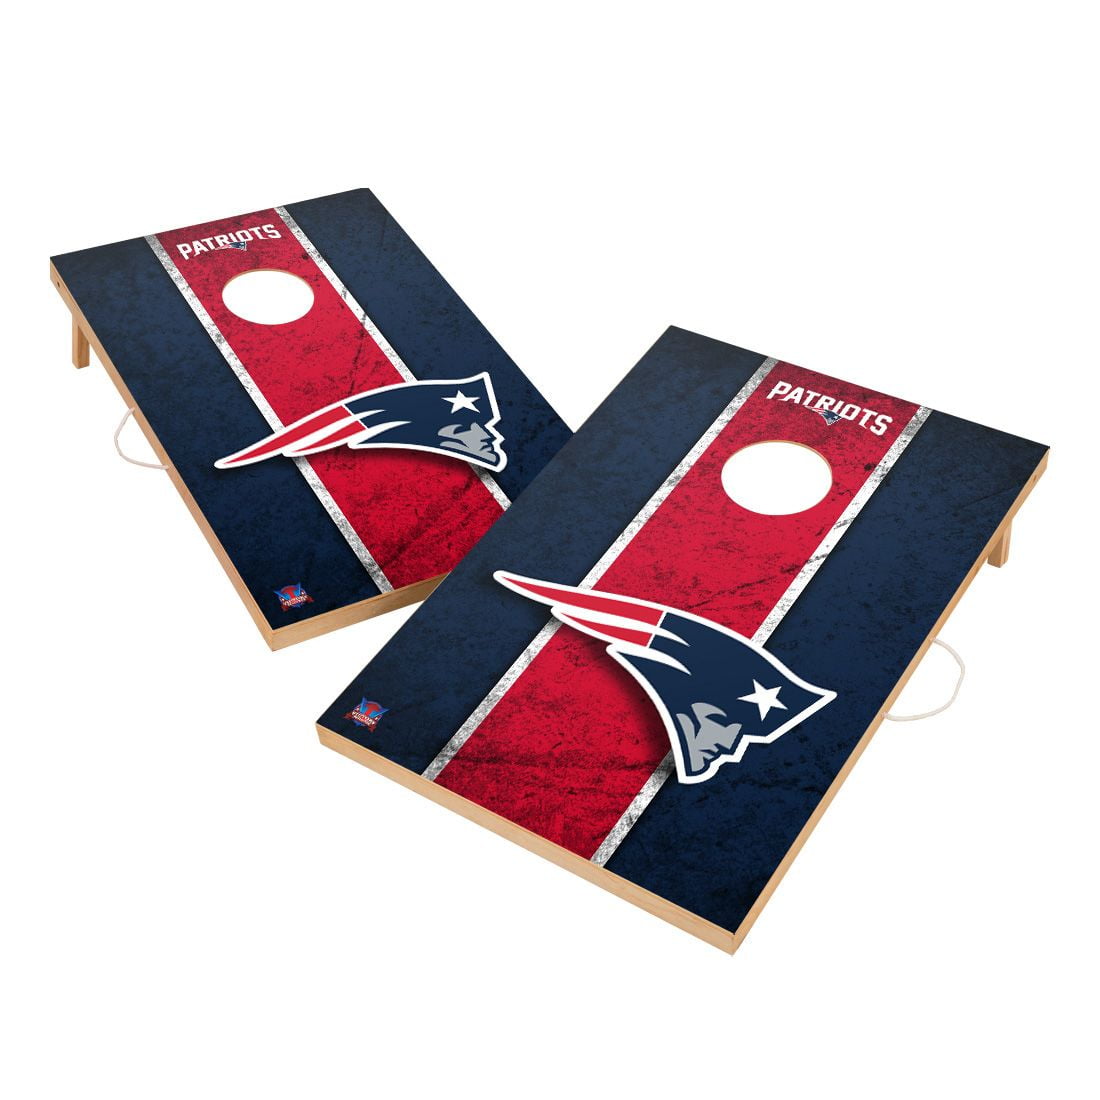 s New England Patriots cornhole board or vehicle decal 